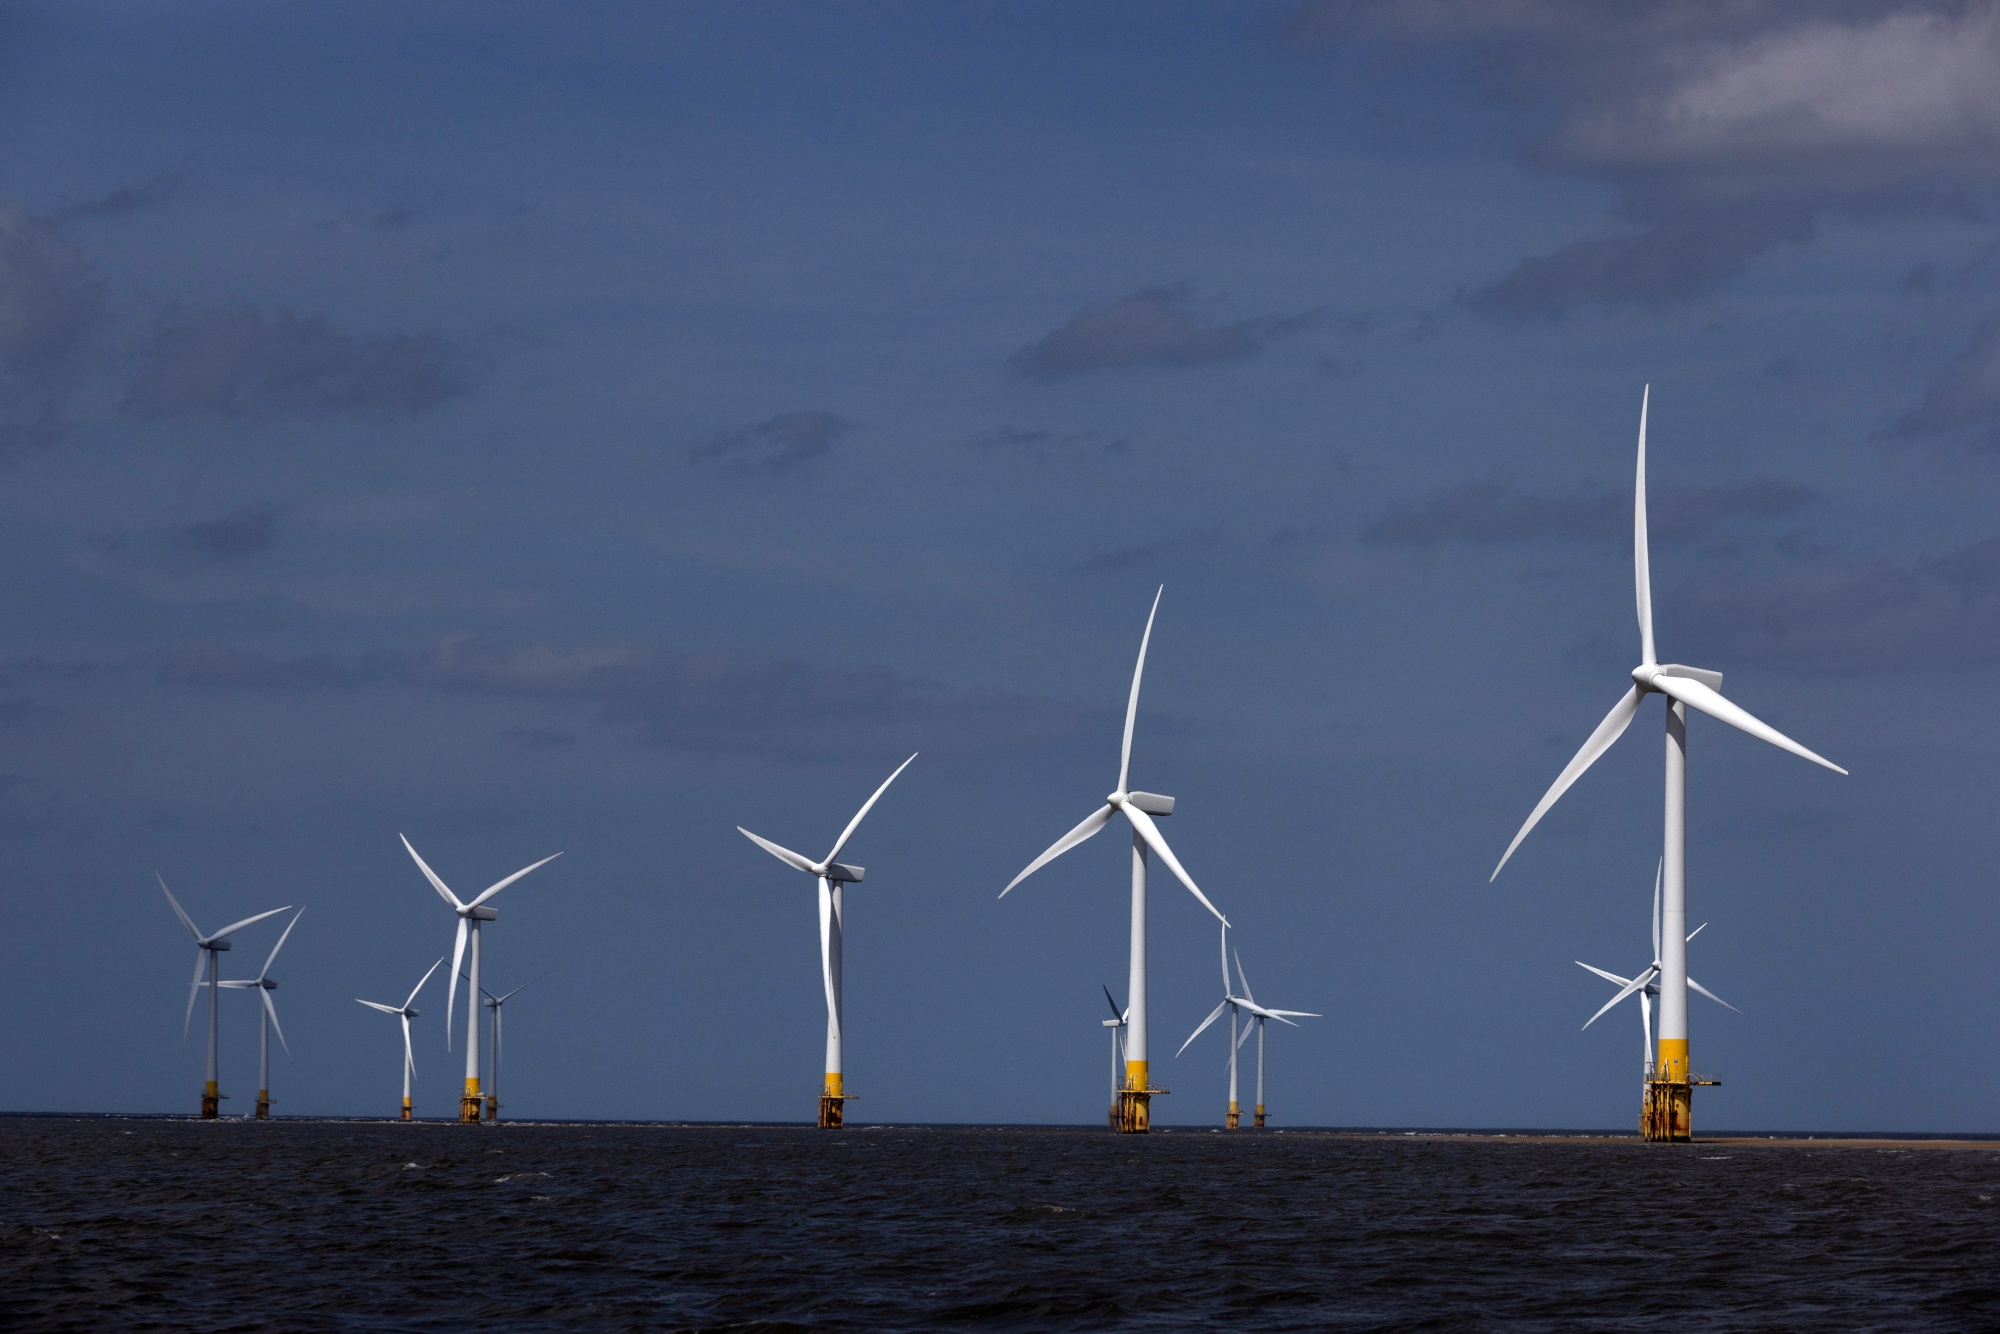 Offshore wind turbines at the Scroby Sands Wind Farm&nbsp;near Great Yarmouth, UK.